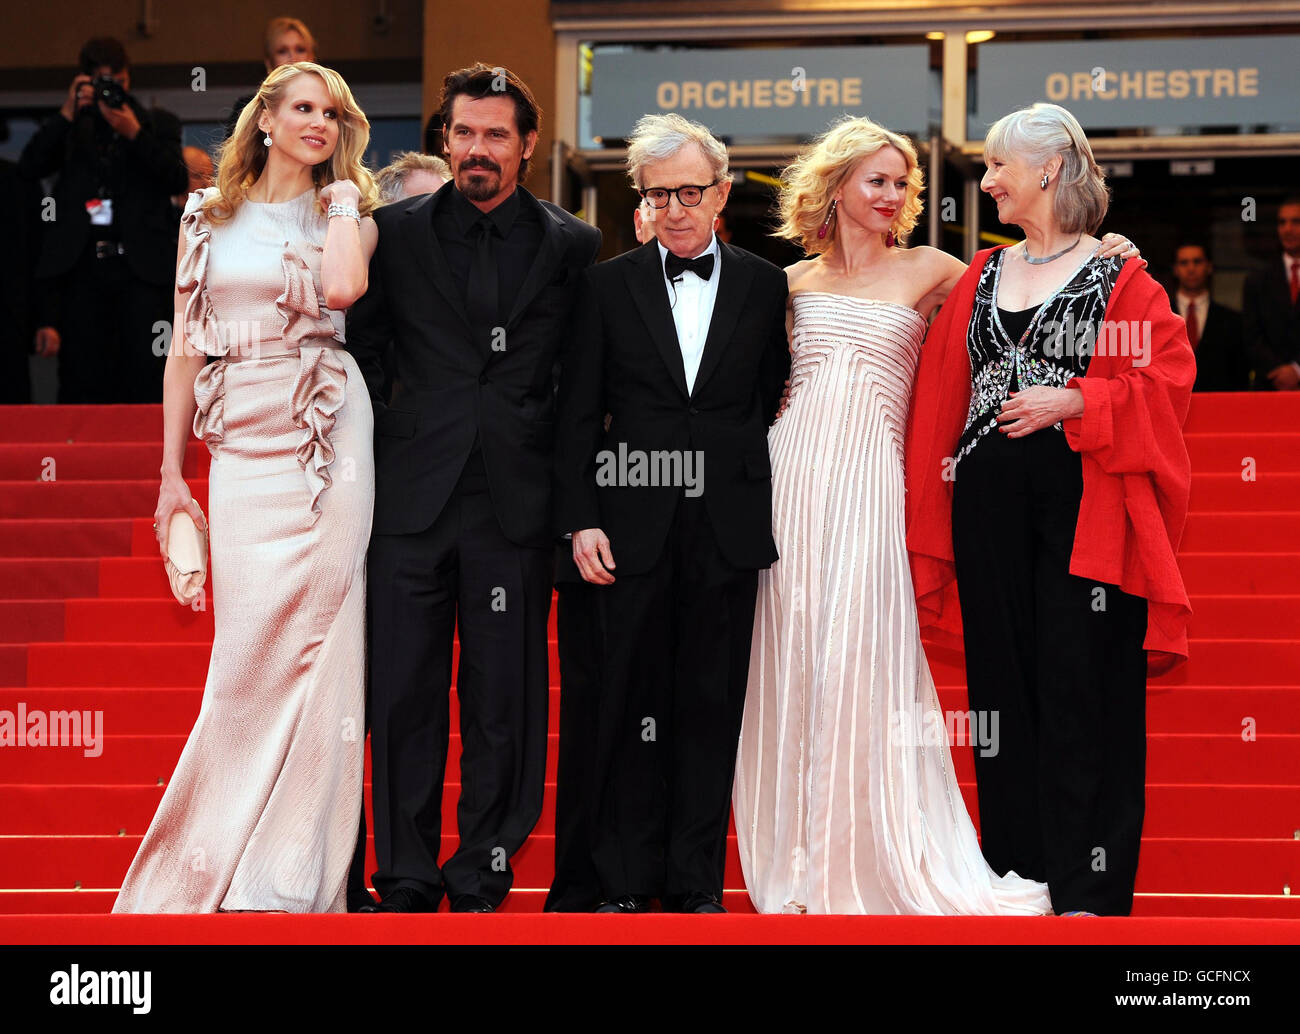 (Left to right) Lucy Punch, Josh Brolin, Woody Allen, Naomi Watts and Gemma Jones arrive for the premiere of You Will Meet A Tall Dark Stranger, at the 63rd Cannes Film Festival, France. Stock Photo